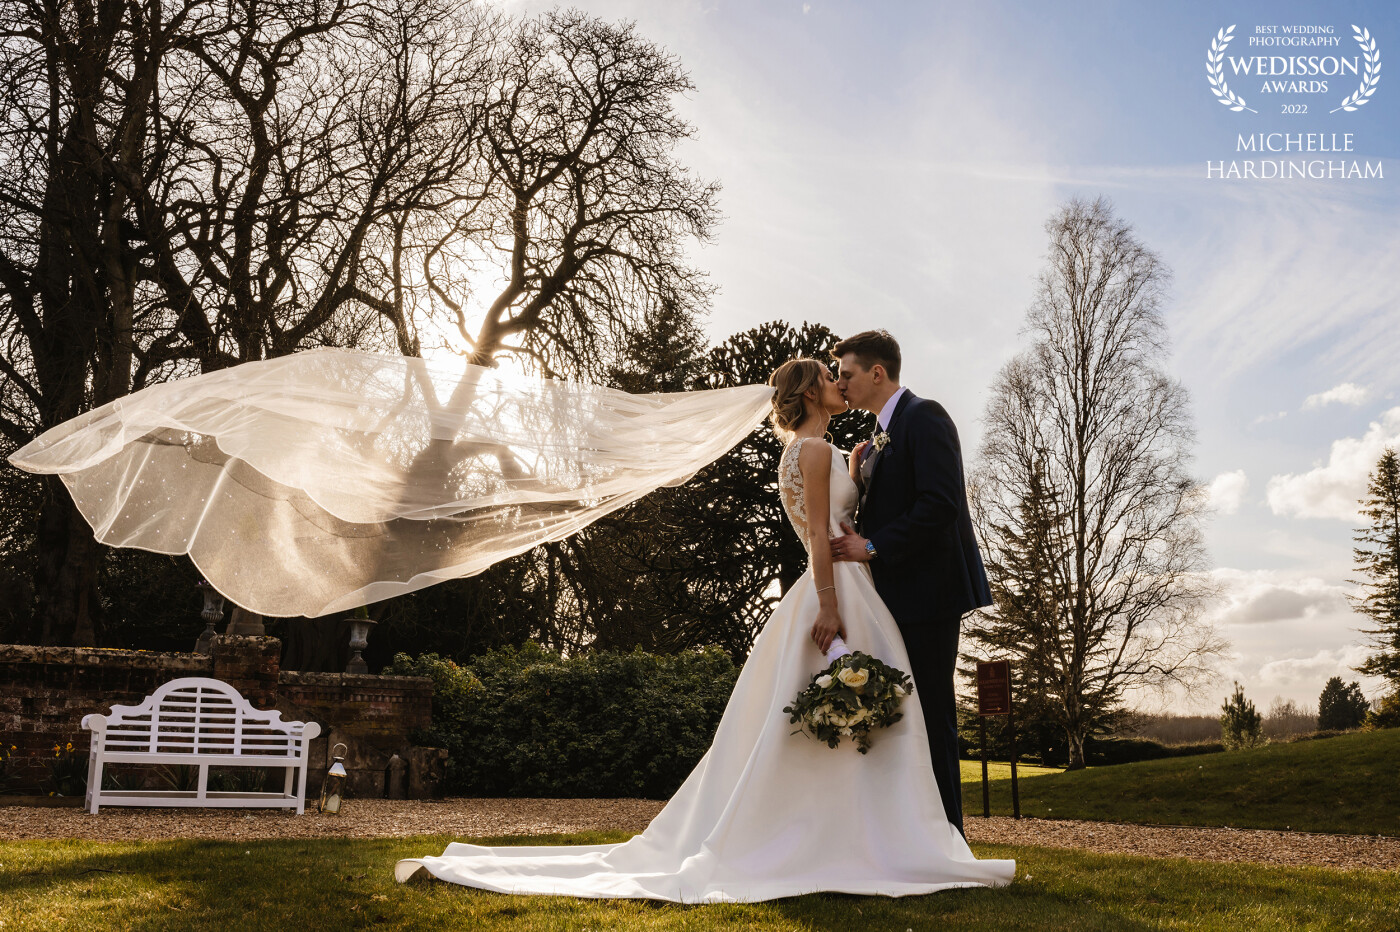 Megan and Matts wedding at Holmewood Hall was elegant, detailed and incredibly stunning. We had warm sunshine and took great opportunity to explore around the grounds Holmewood Hall has to offer.